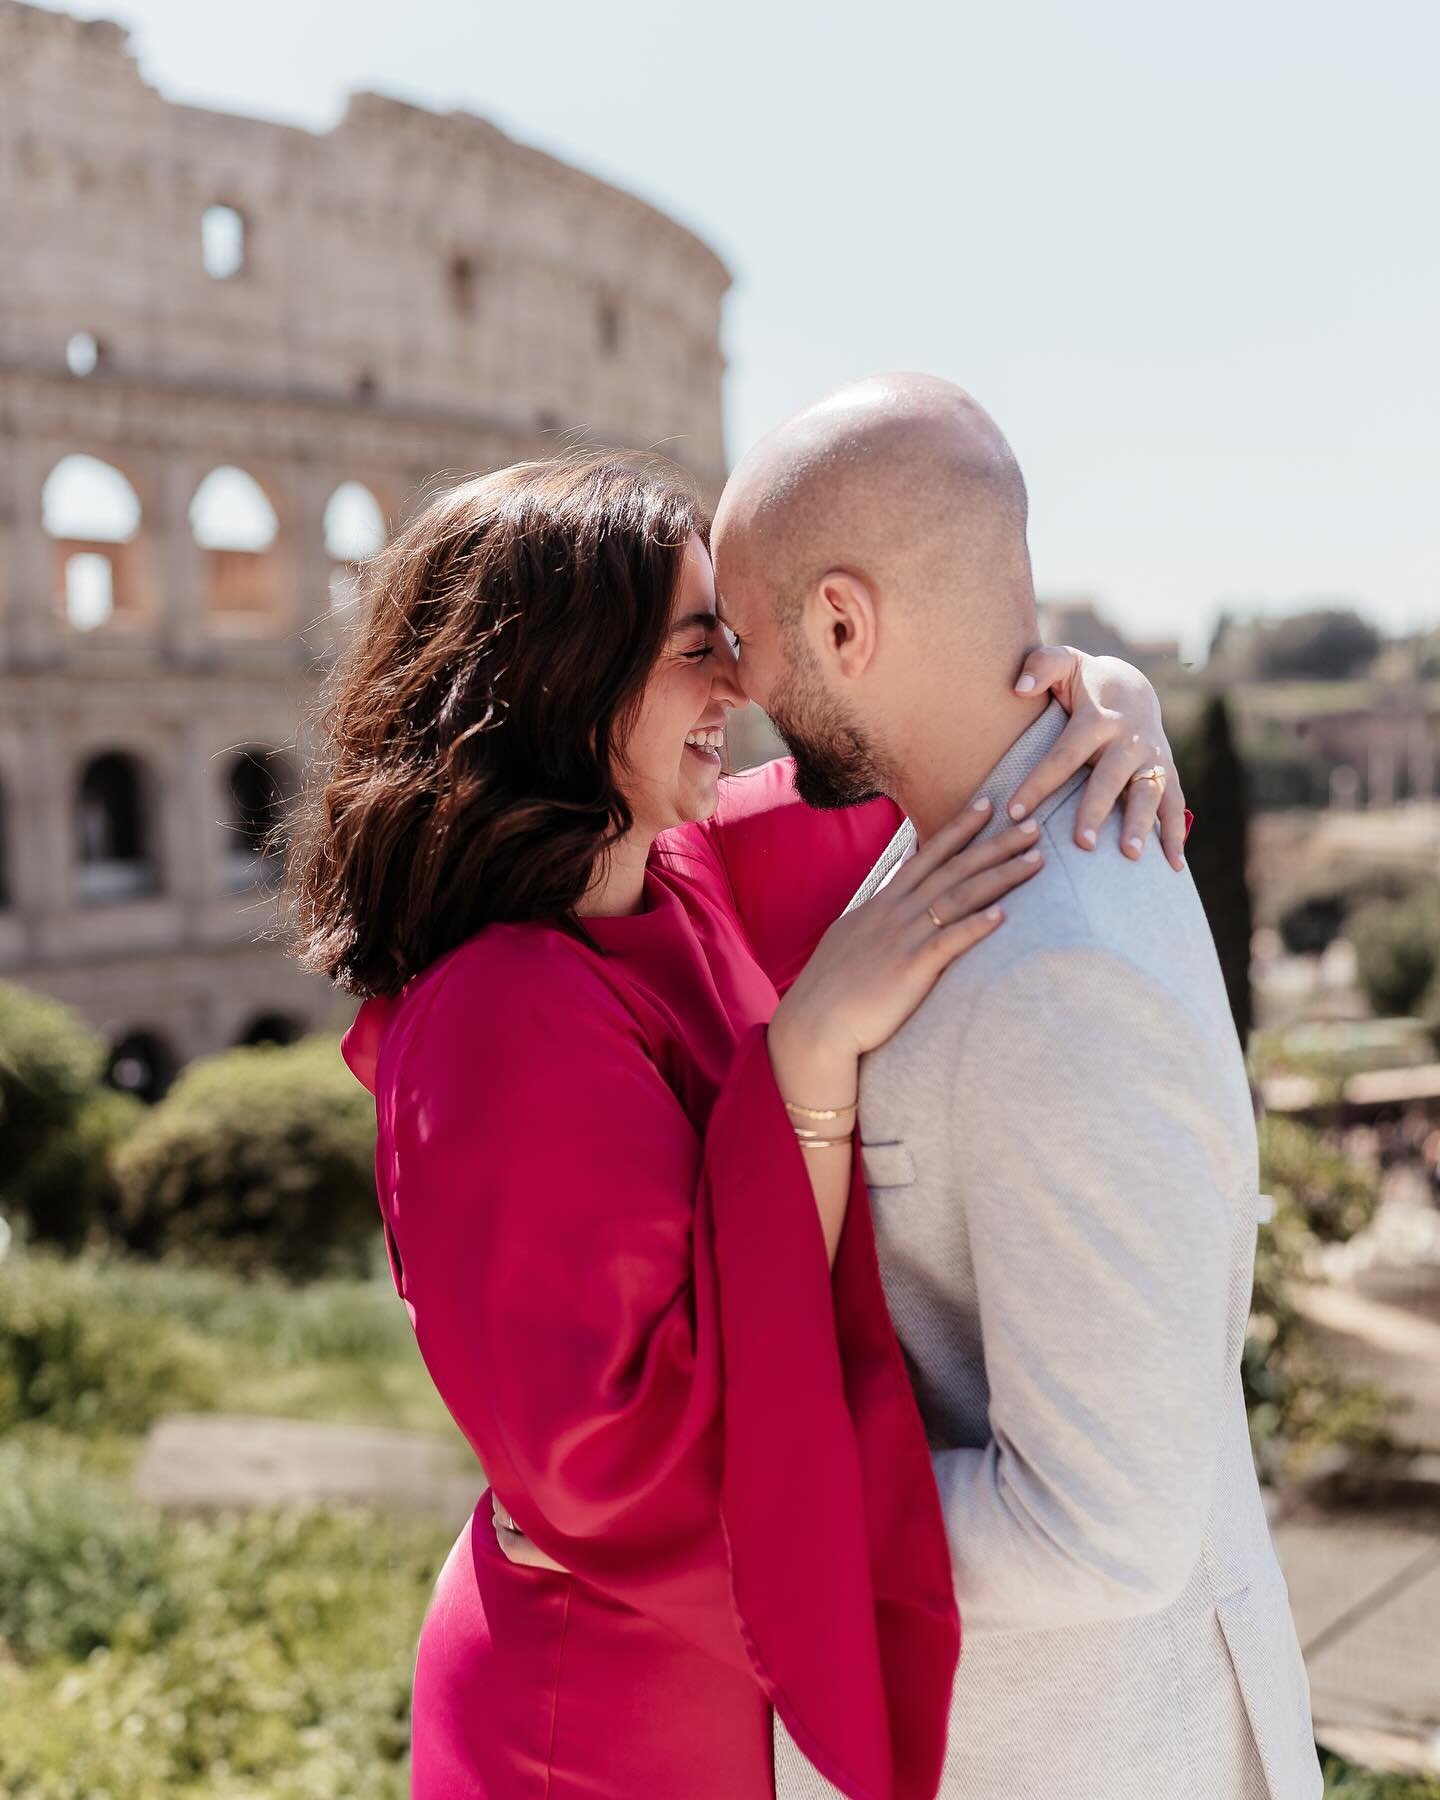 Exploring Rome with Aya and Salim 🇮🇹 

It was the first time in Italy for Aya and Salim, a dream trip they had been planning for ages! A year after they got married, they finally got the chance to go and I was honoured to spend a couple of hours ex